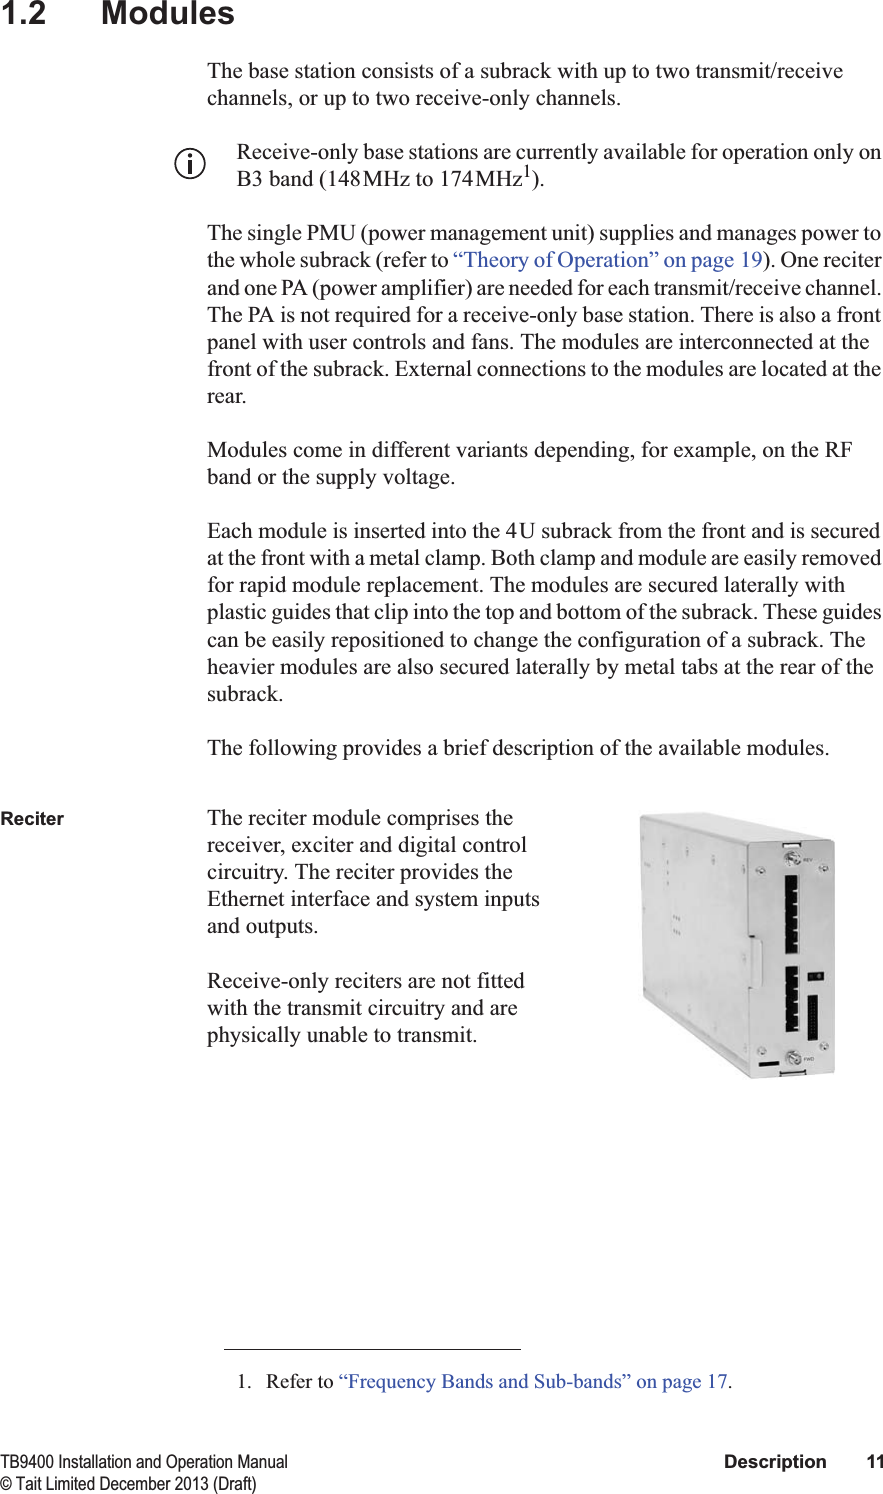  TB9400 Installation and Operation Manual Description 11© Tait Limited December 2013 (Draft)1.2 ModulesThe base station consists of a subrack with up to two transmit/receive channels, or up to two receive-only channels. Receive-only base stations are currently available for operation only on B3 band (148MHz to 174MHz1).The single PMU (power management unit) supplies and manages power to the whole subrack (refer to “Theory of Operation” on page 19). One reciter and one PA (power amplifier) are needed for each transmit/receive channel. The PA is not required for a receive-only base station. There is also a front panel with user controls and fans. The modules are interconnected at the front of the subrack. External connections to the modules are located at the rear.Modules come in different variants depending, for example, on the RF band or the supply voltage. Each module is inserted into the 4U subrack from the front and is secured at the front with a metal clamp. Both clamp and module are easily removed for rapid module replacement. The modules are secured laterally with plastic guides that clip into the top and bottom of the subrack. These guides can be easily repositioned to change the configuration of a subrack. The heavier modules are also secured laterally by metal tabs at the rear of the subrack.The following provides a brief description of the available modules.Reciter The reciter module comprises the receiver, exciter and digital control circuitry. The reciter provides the Ethernet interface and system inputs and outputs. Receive-only reciters are not fitted with the transmit circuitry and are physically unable to transmit.1. Refer to “Frequency Bands and Sub-bands” on page 17.